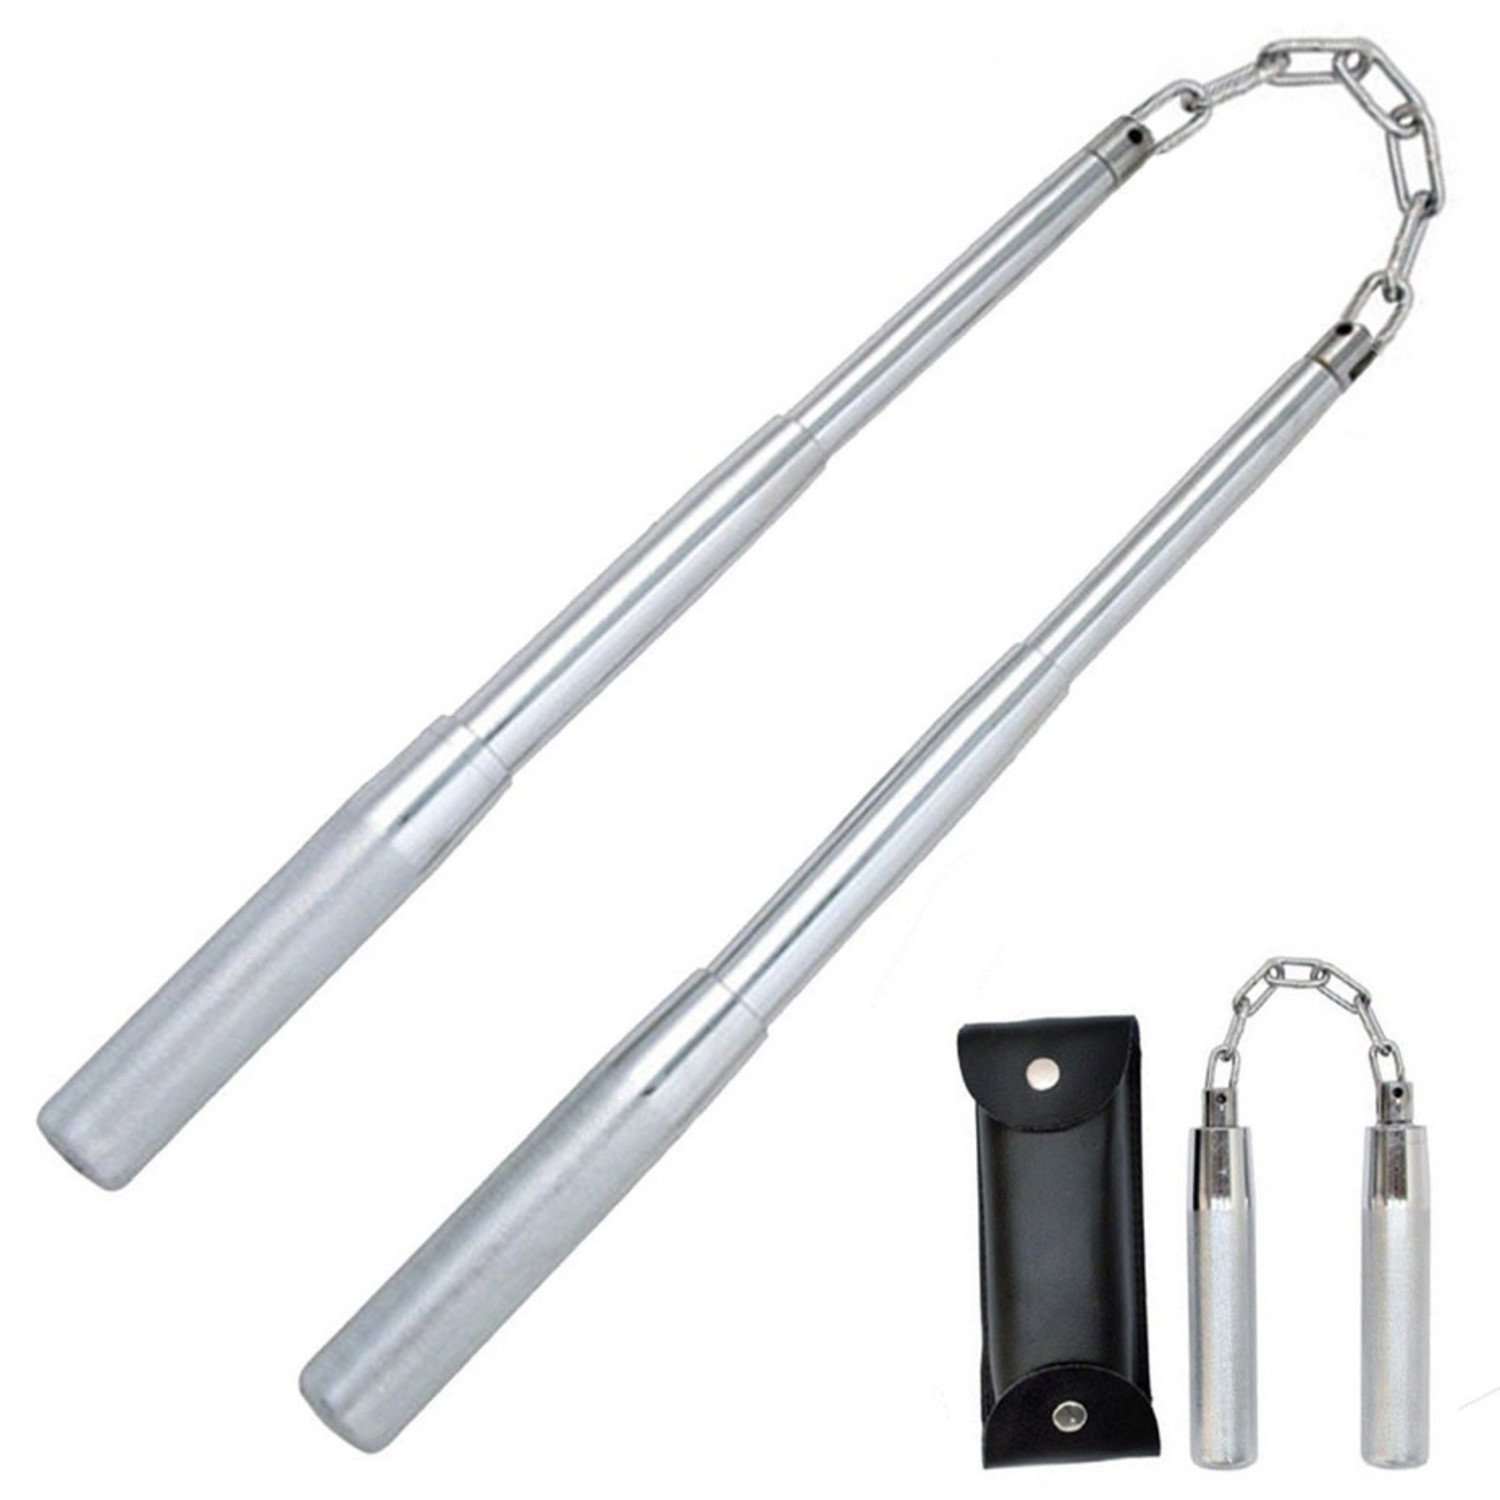 Chrome telescopic Nunchaku with metal Chain and Carry Case - Enso